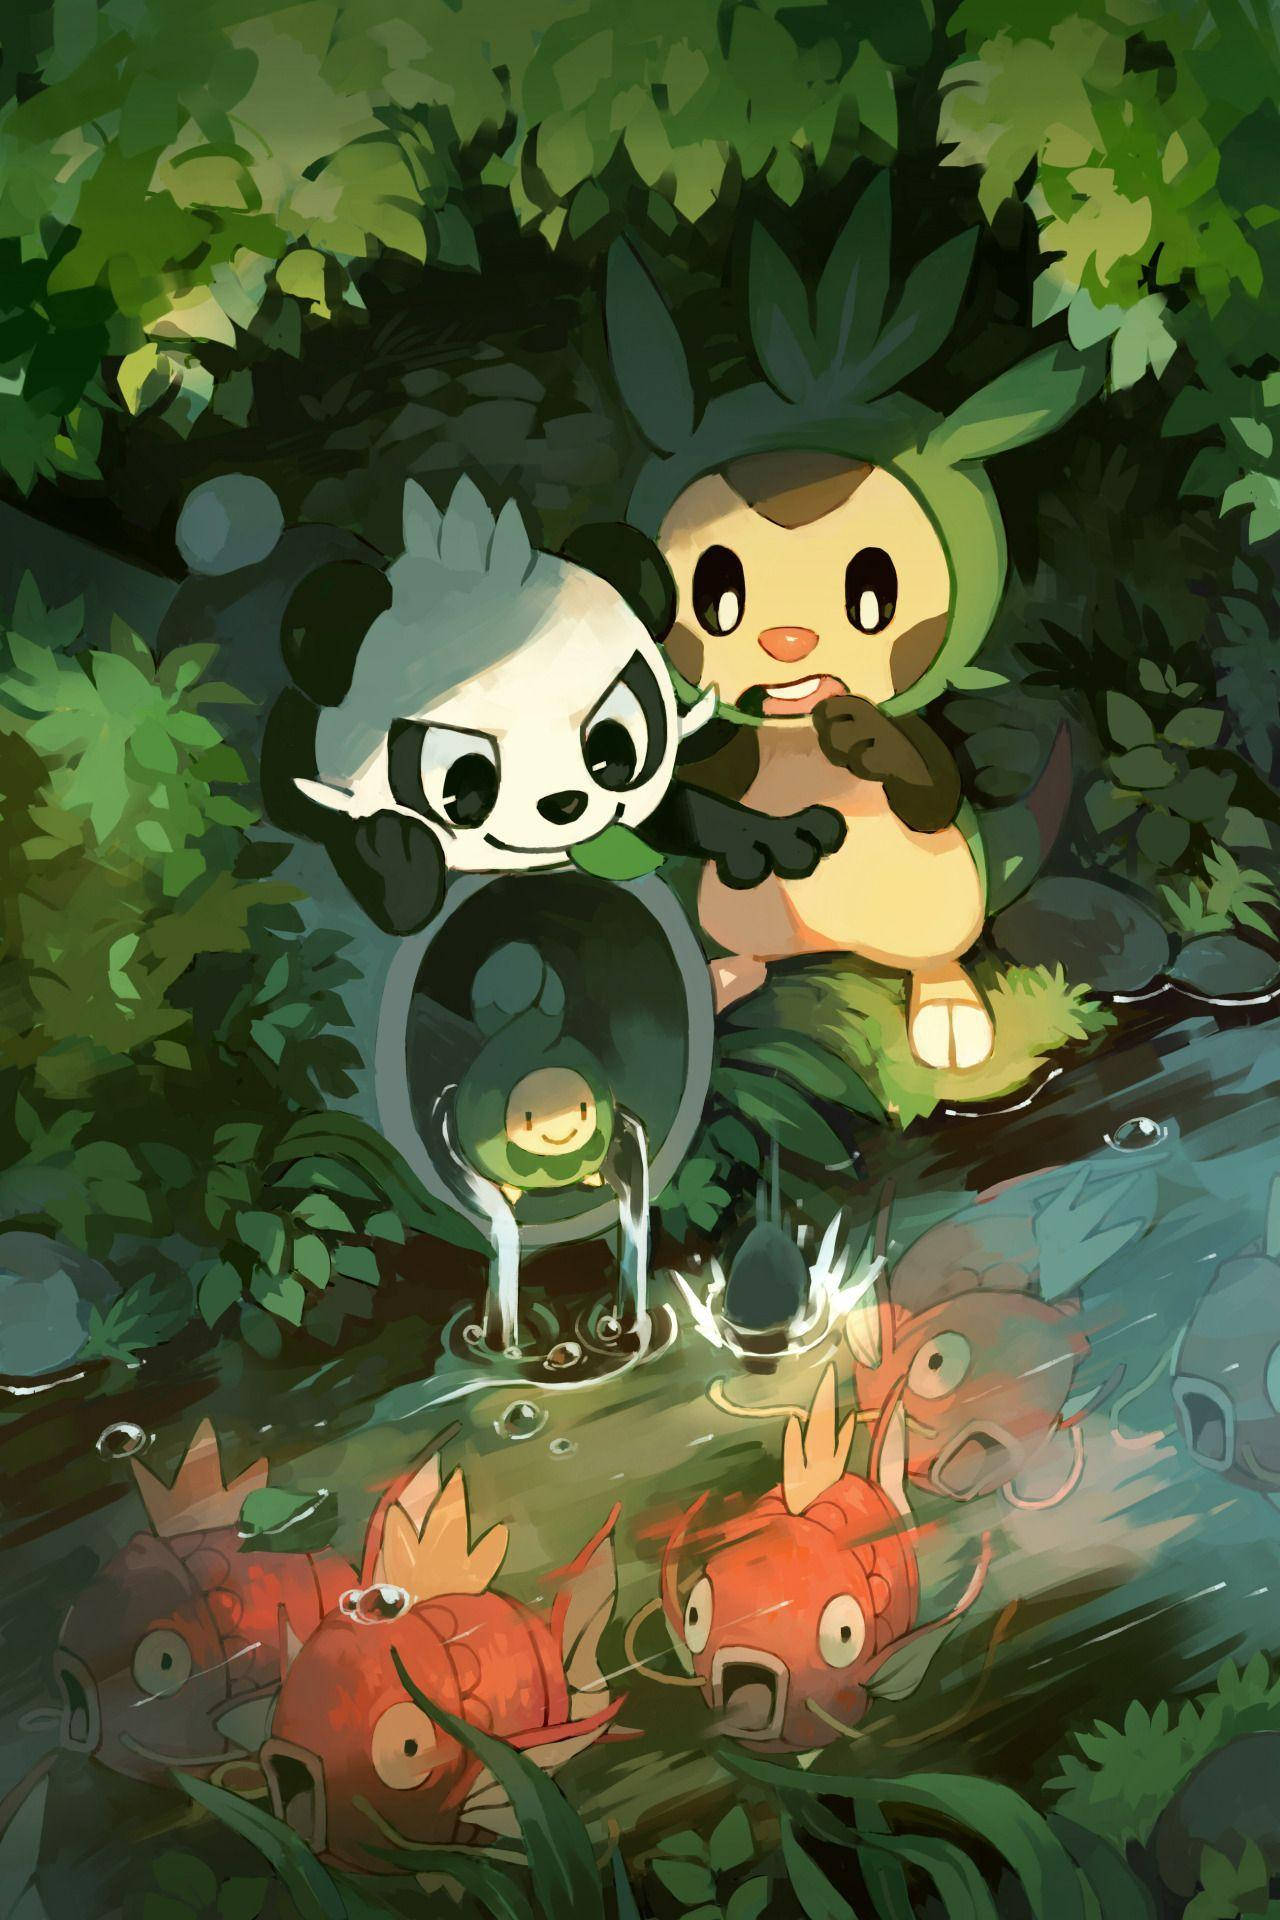 Pancham,chespin Och Budew. (note: In Swedish, It Is Common To Not Capitalize Species Names, Unless They Are Also Proper Nouns.) Wallpaper